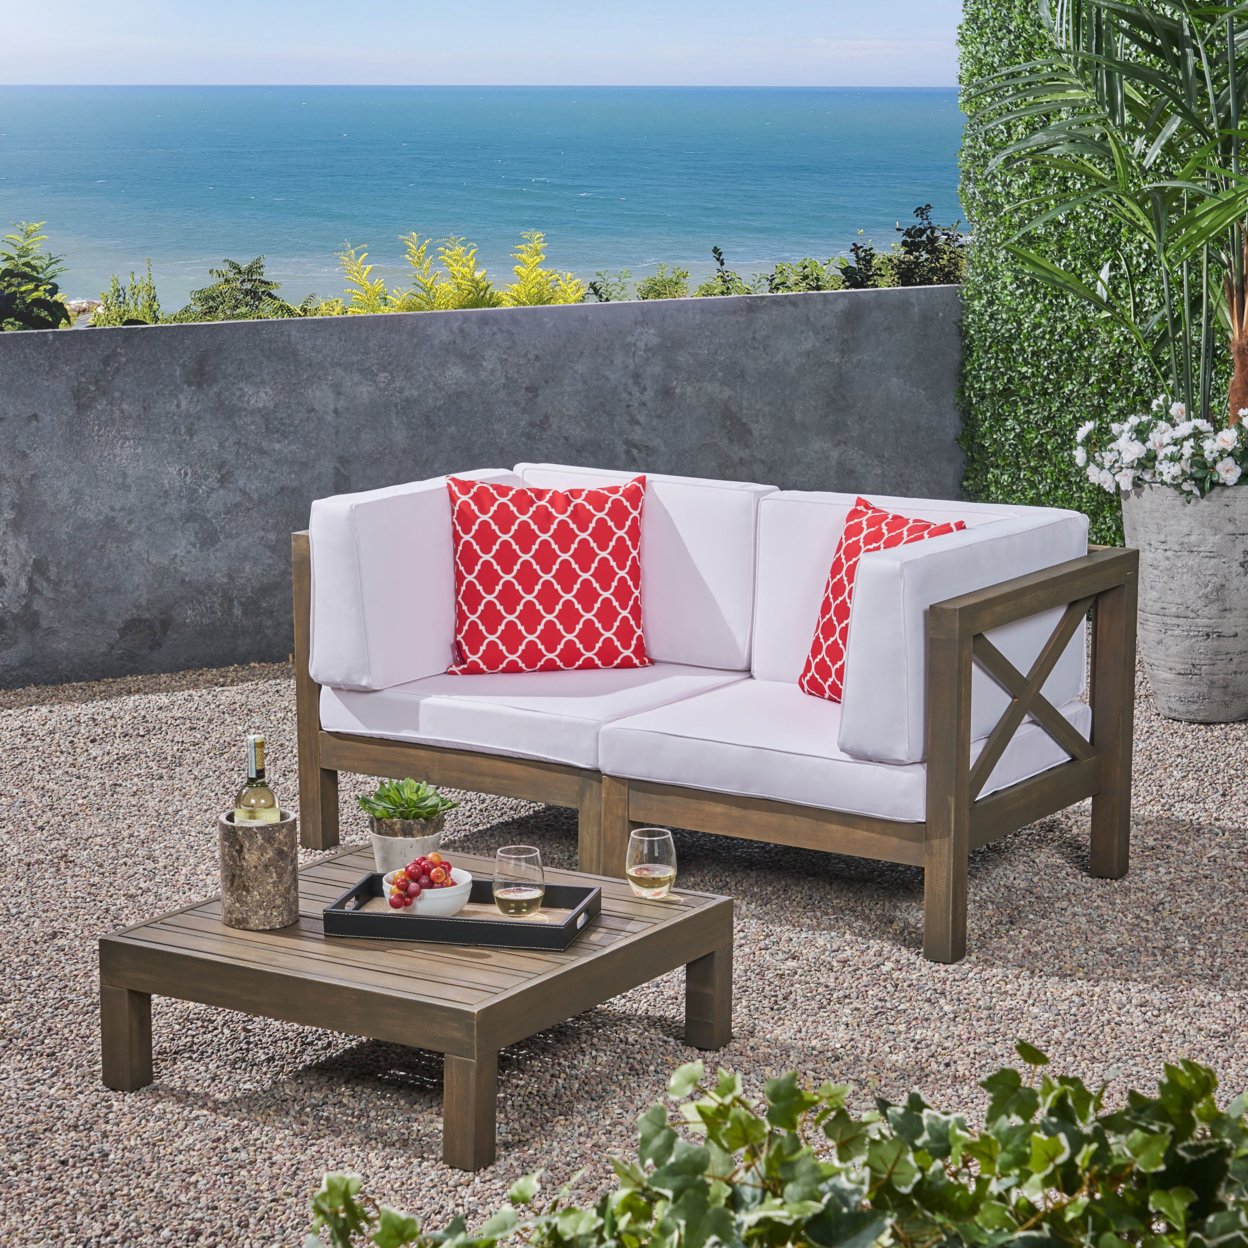 Great Deal Furniture Keith Outdoor Sectional Loveseat Set With Coffee Table 2-Seater Acacia Wood Water-Resistant Cushions - White